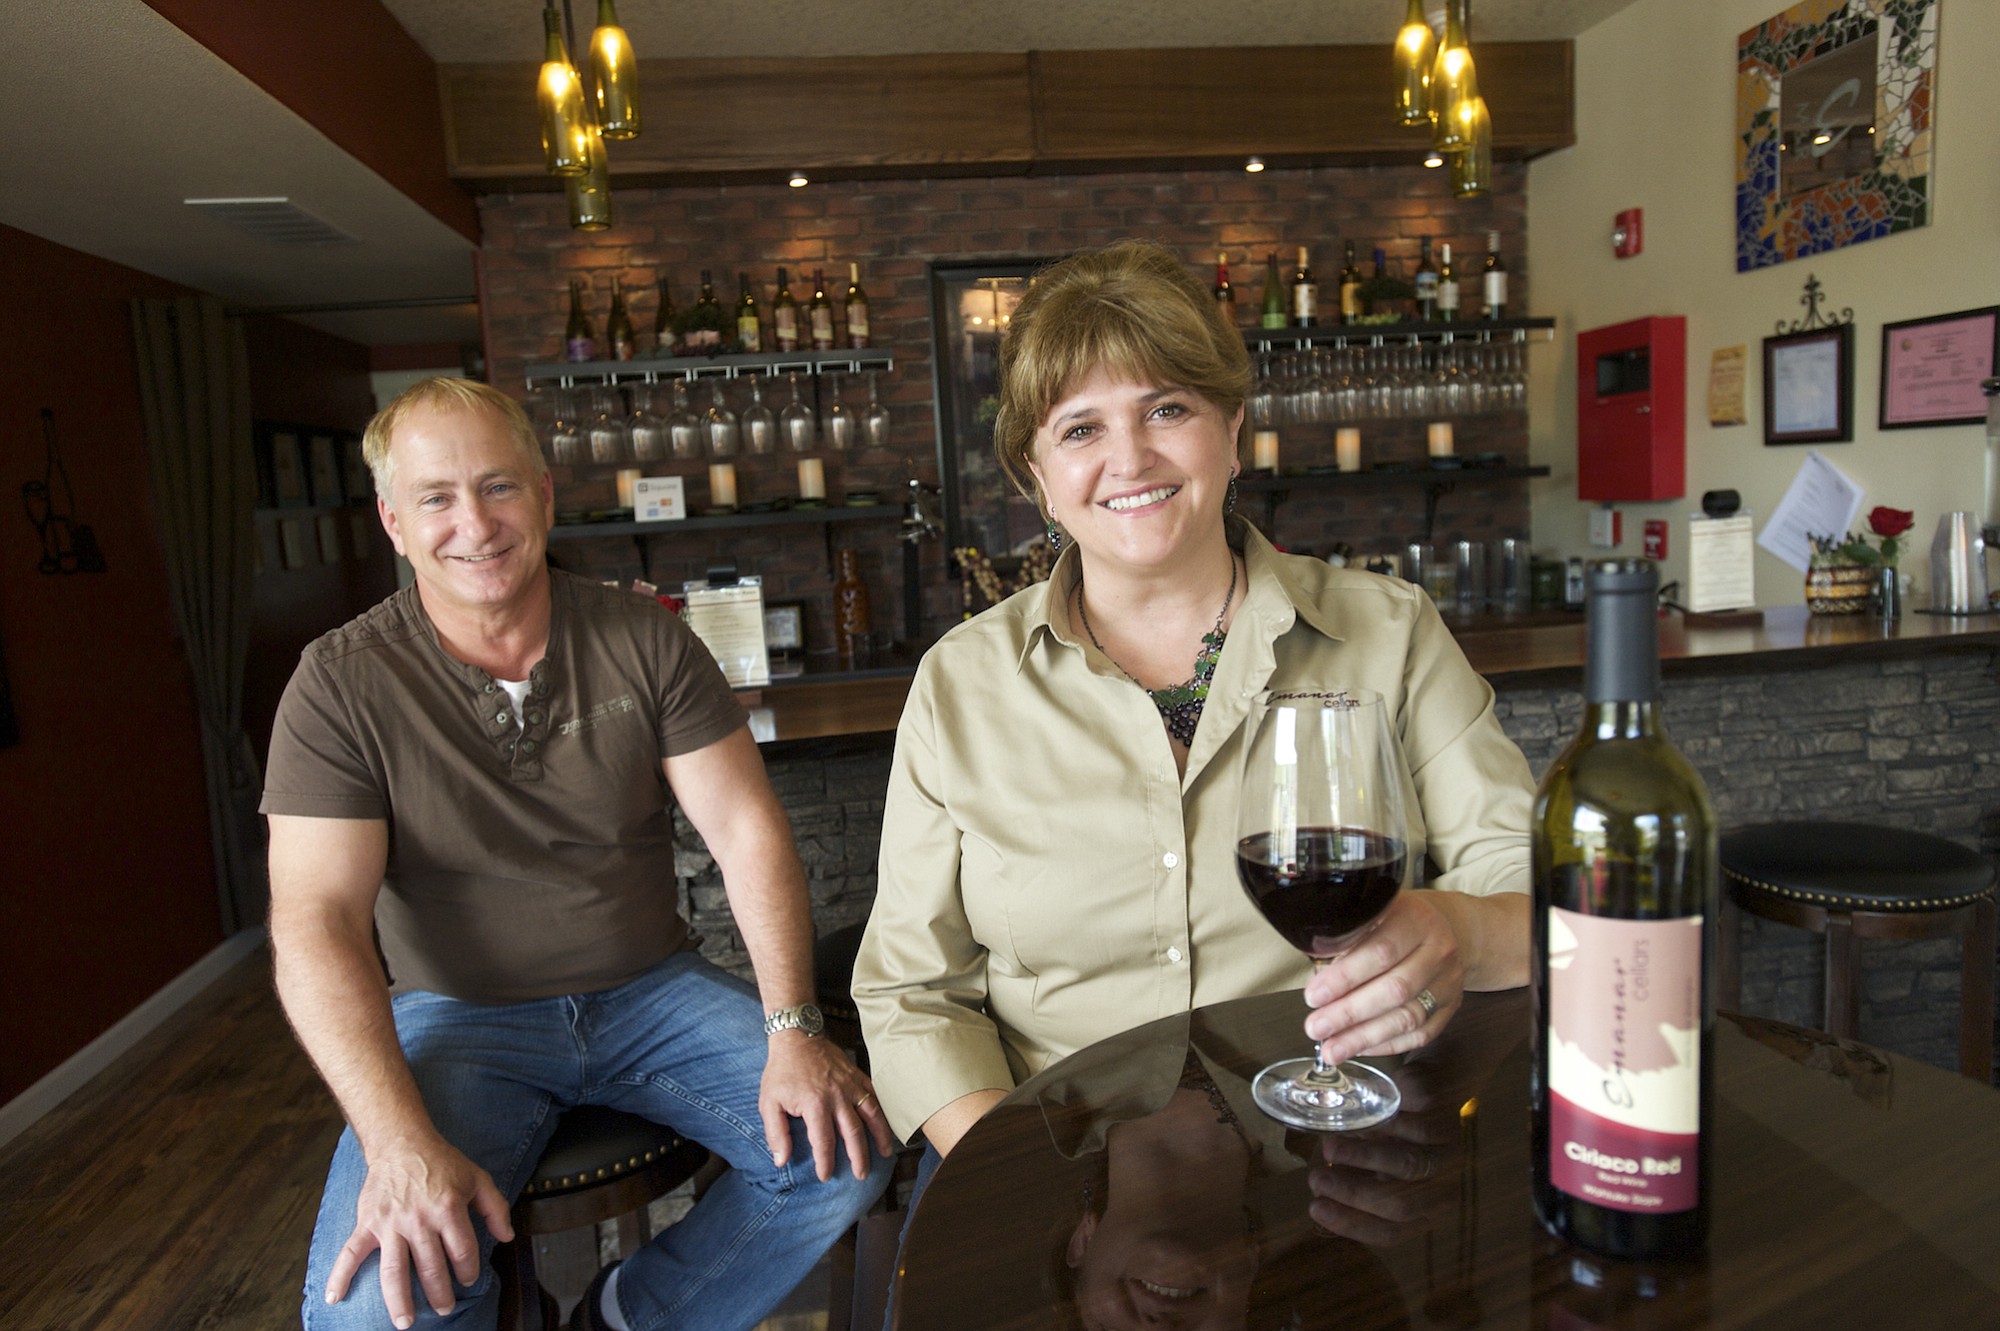 Mar Meyerhoefer and her husband, Richard, operate a tasting room/restaurant and sell imported Spanish wines, plus local wines at their wine shop in Battle Ground Village.